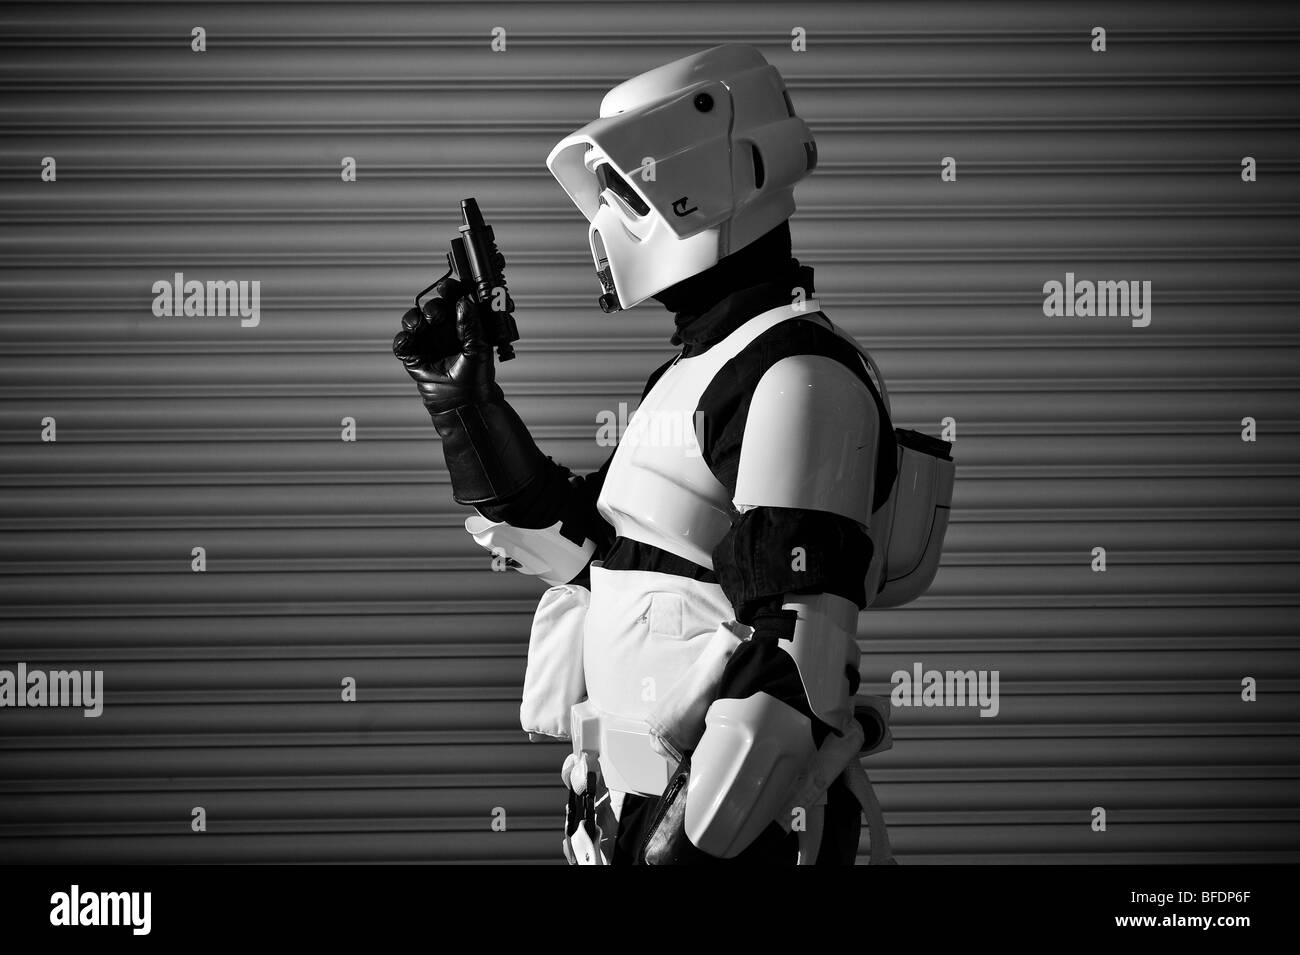 A Stormtrooper from the Star Wars universe ready for battle, standing in front of a corrugated metal wall. Stock Photo